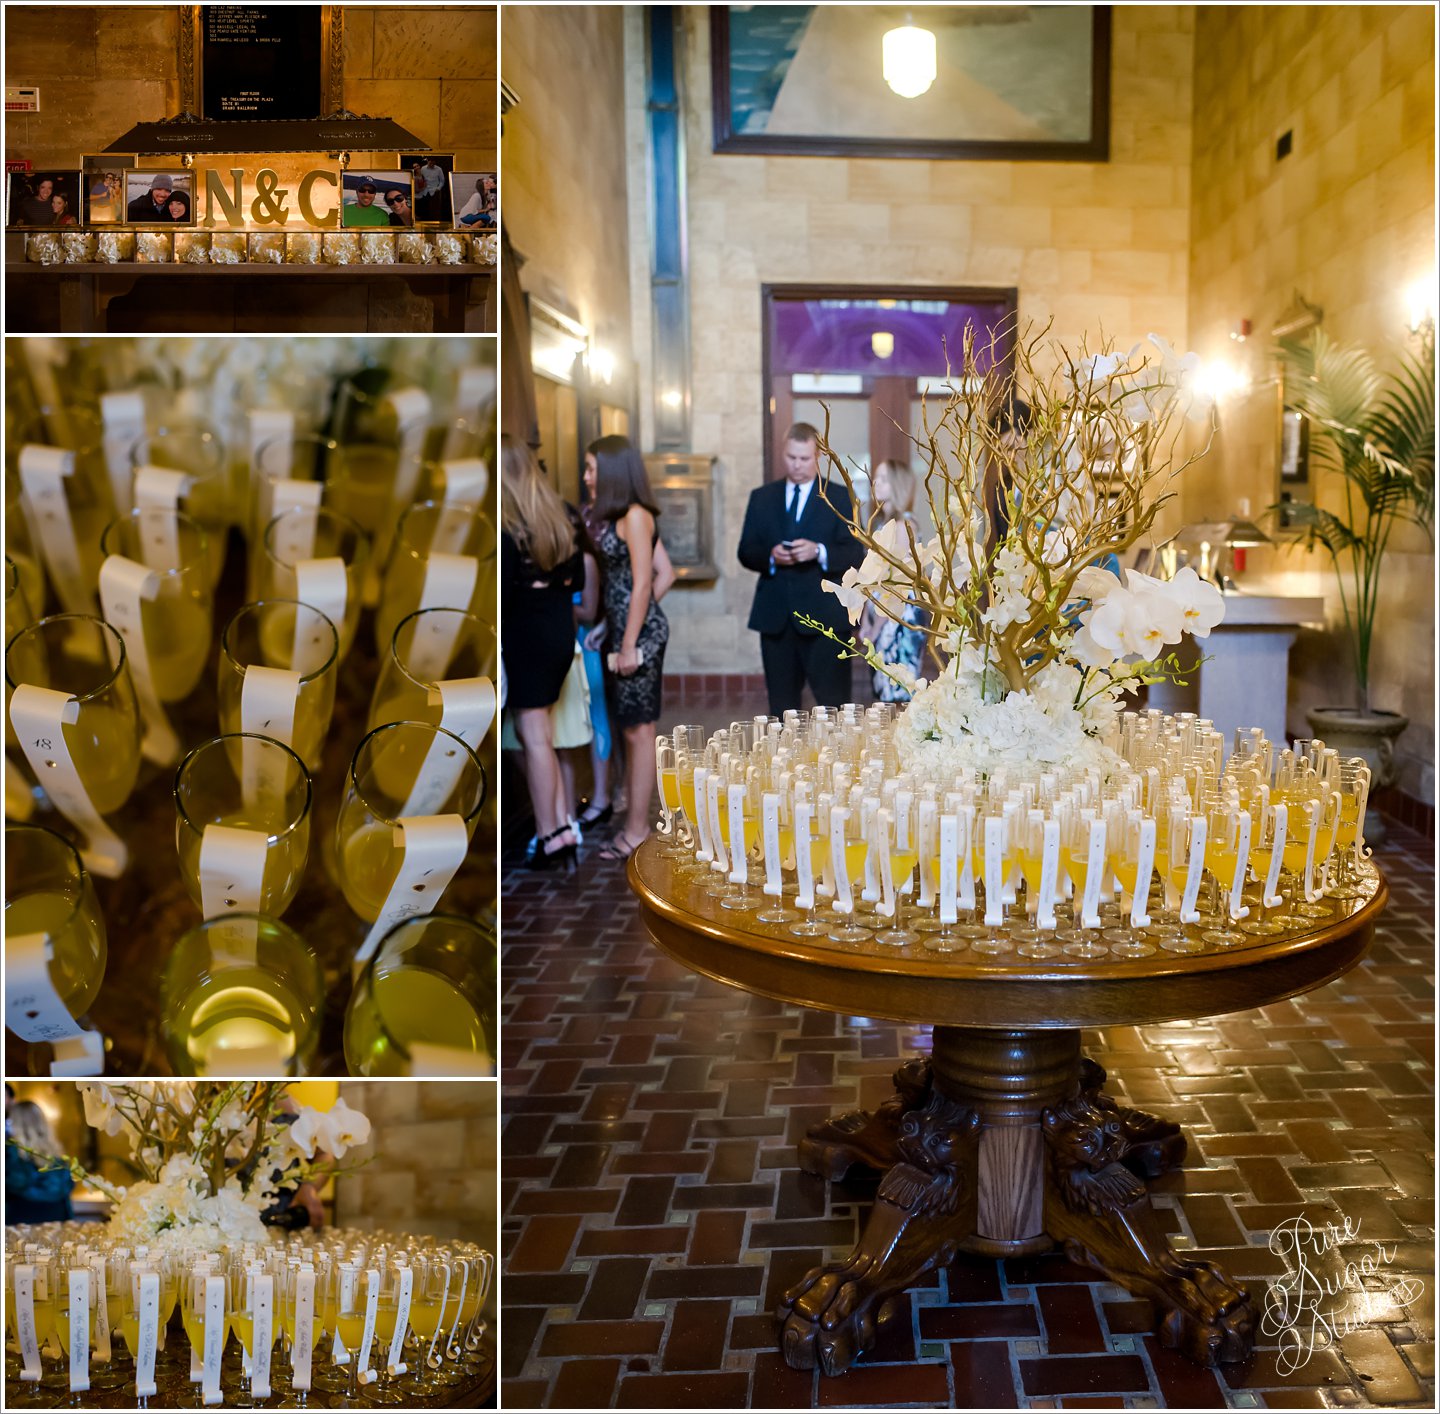 Eli Meyer,Executive Food Service,Monique Lhuillier,Not Too Shabby Bakery,Pure Sugar Studios,Reception,St. Augustine Wedding Photographer,Stephanie Bolen,The Rivertwon band,Treasury,Treasury on the Plaza,evrything with plants and flowers,v,